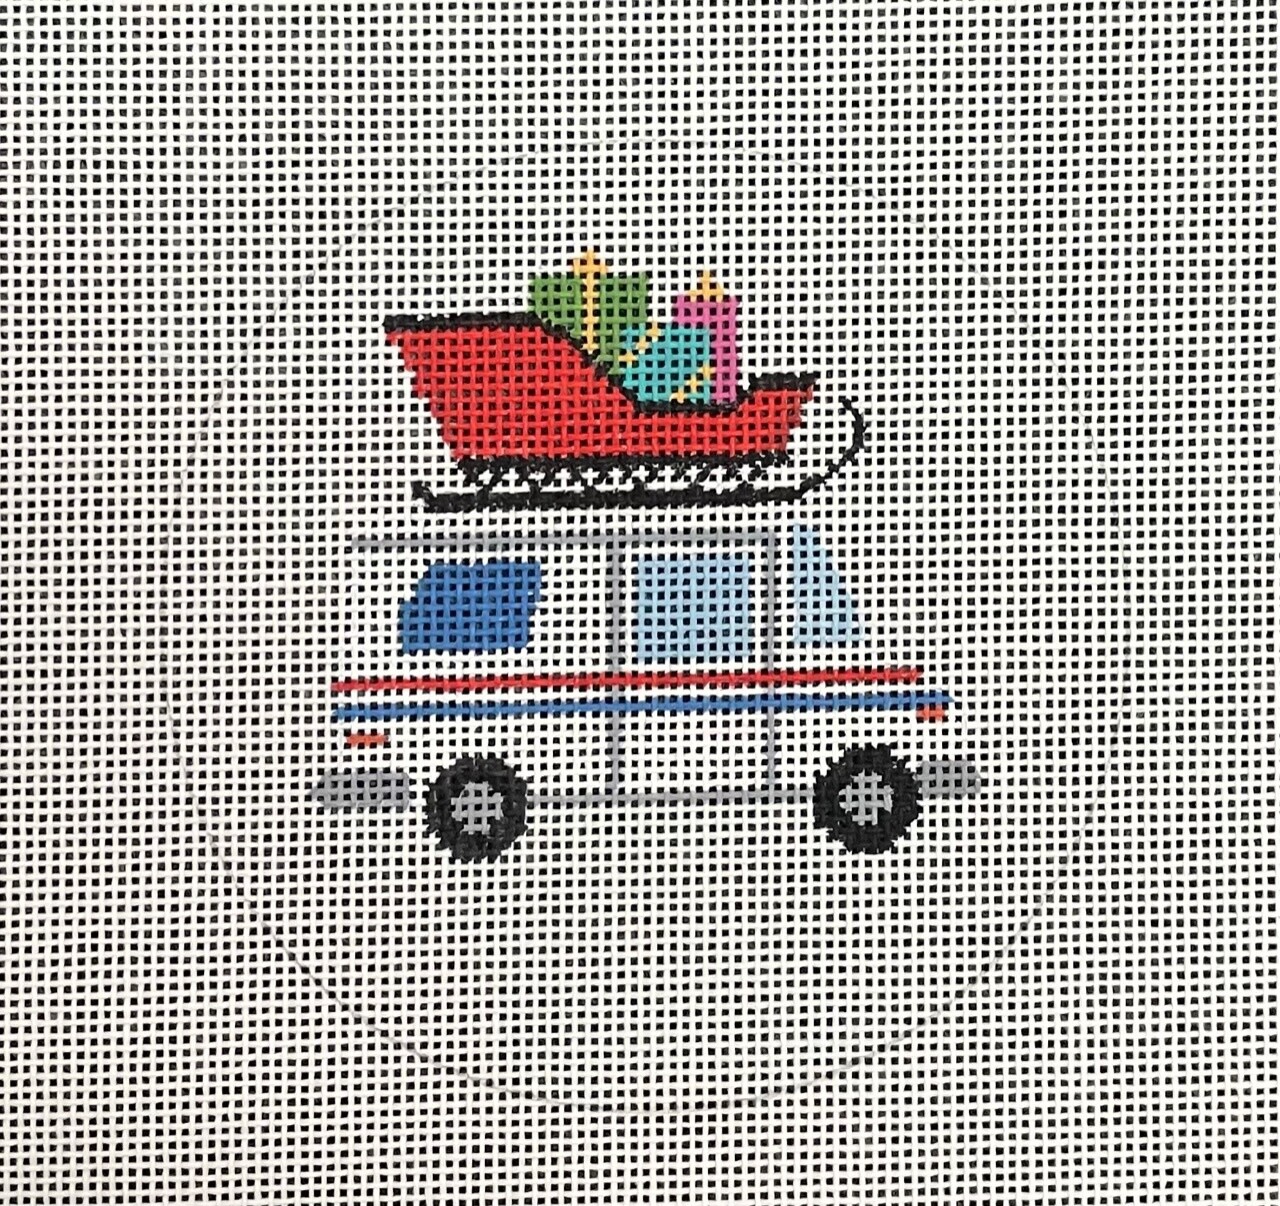 USPS Christmas Delivery Truck